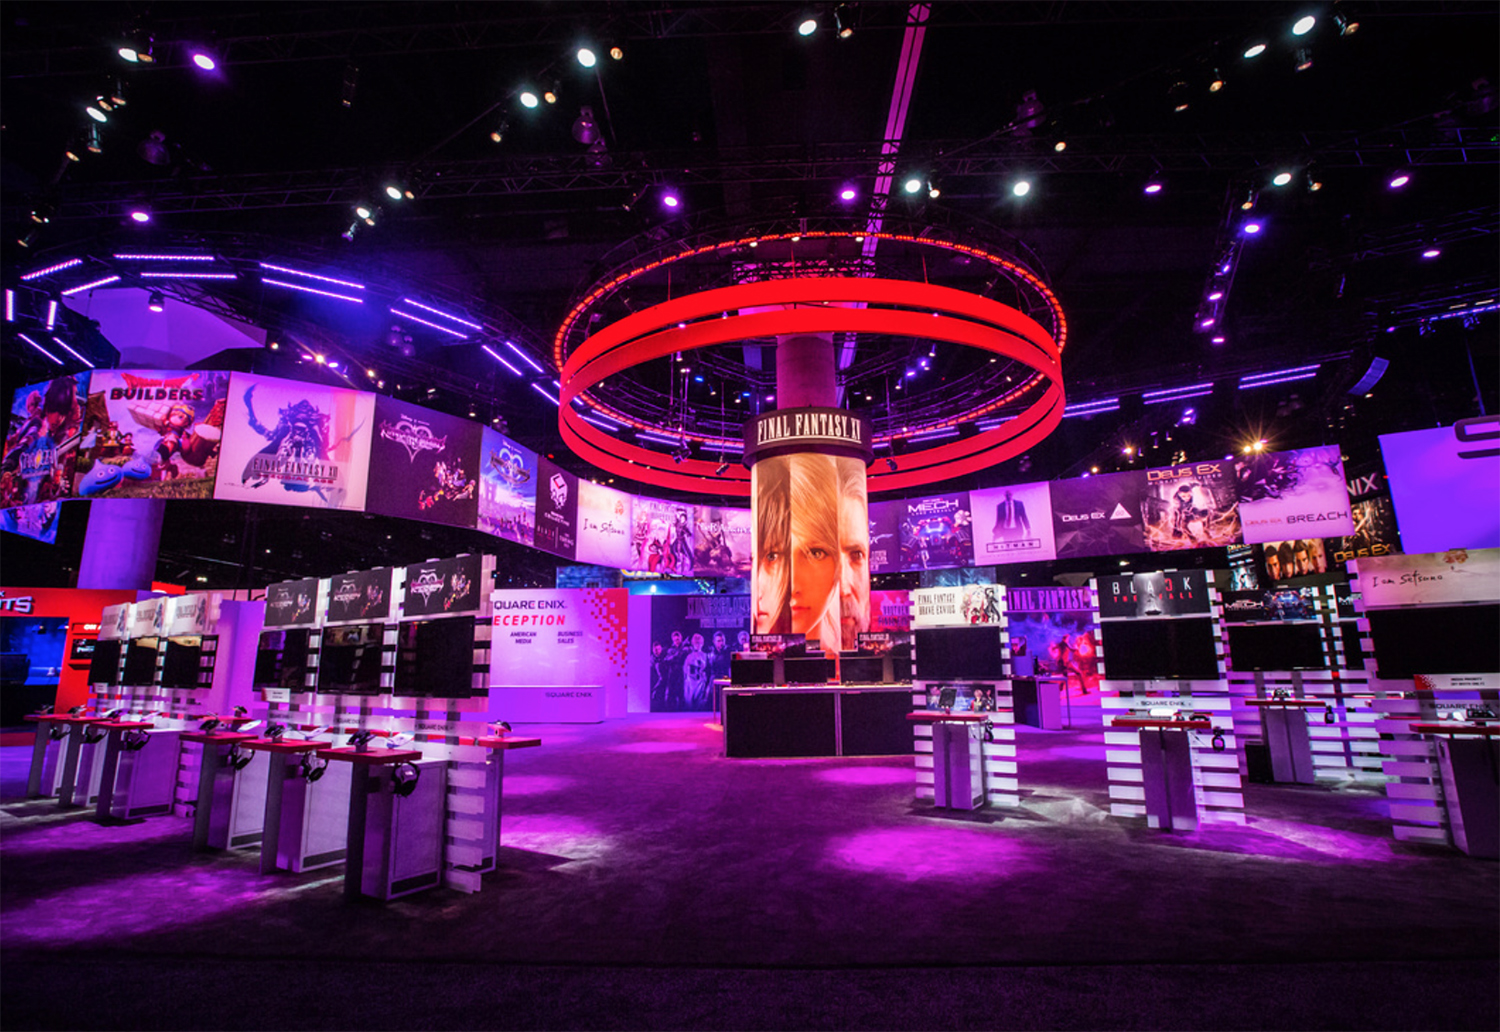 How Square Enix Stood Out With an Open Format Booth at E3